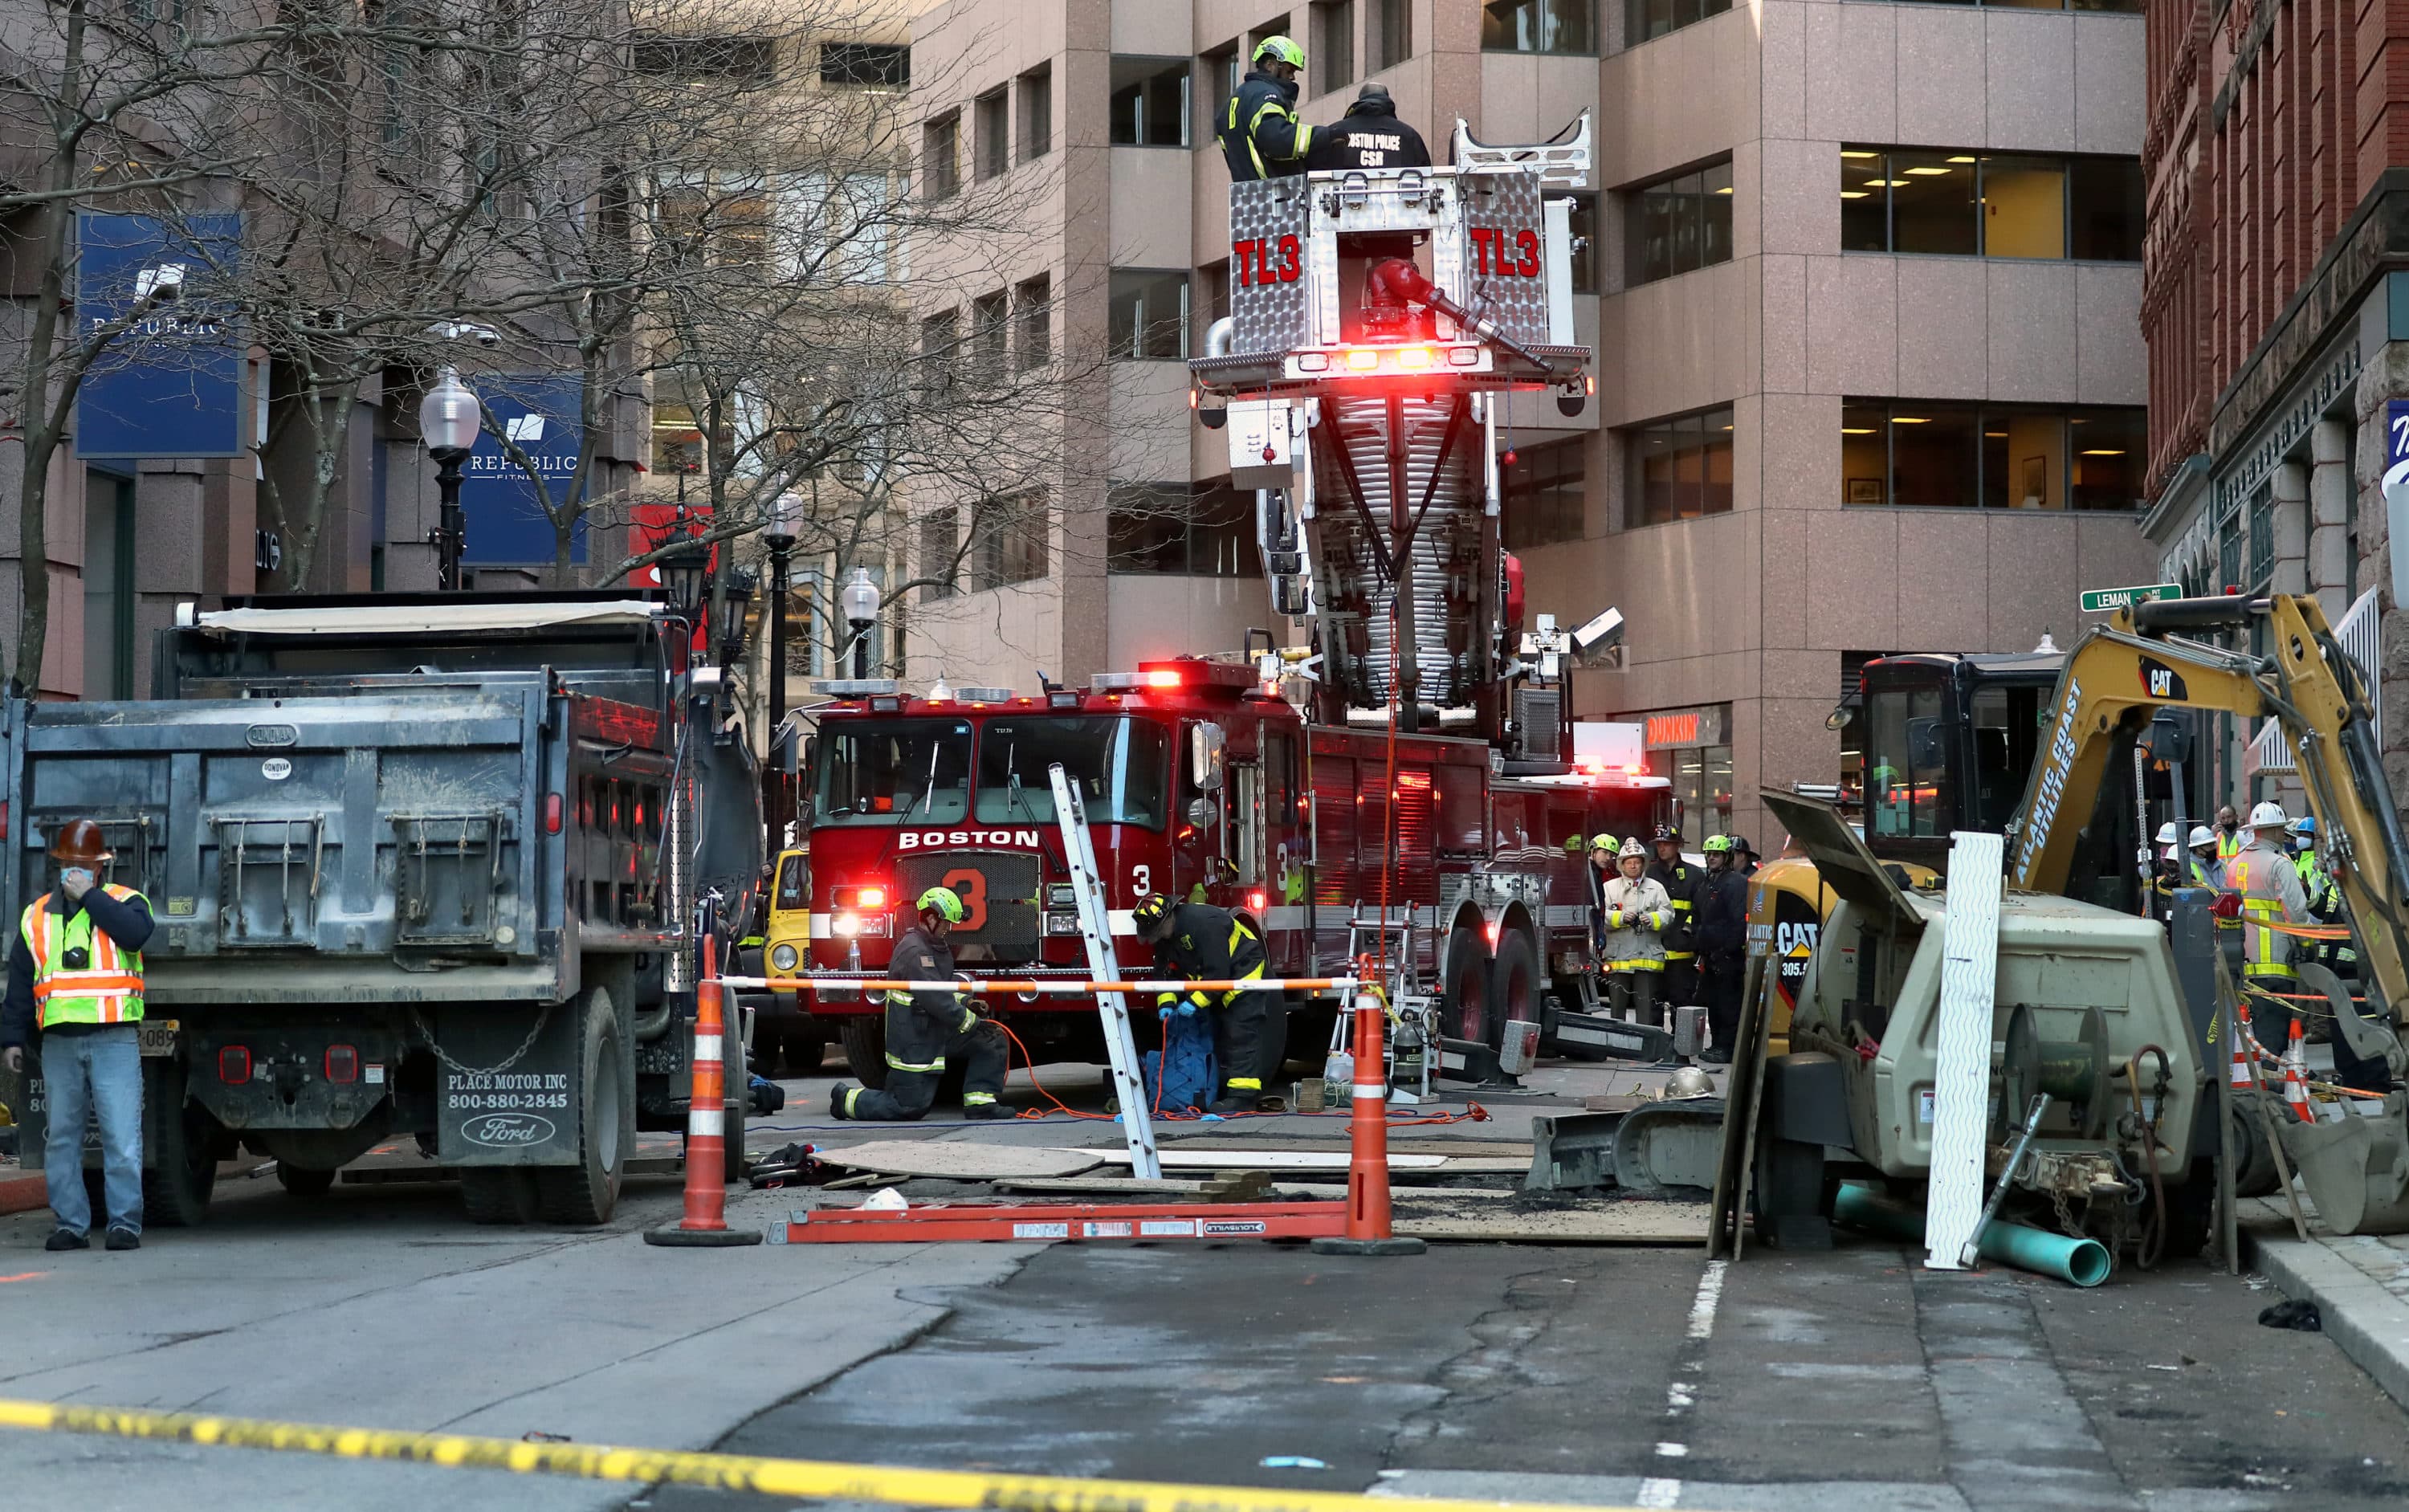 The truck involved in the crash is pictured on the left as firefighters and first responders stand at the scene in downtown Boston on Feb. 24, 2021. (David L. Ryan/The Boston Globe via Getty Images)